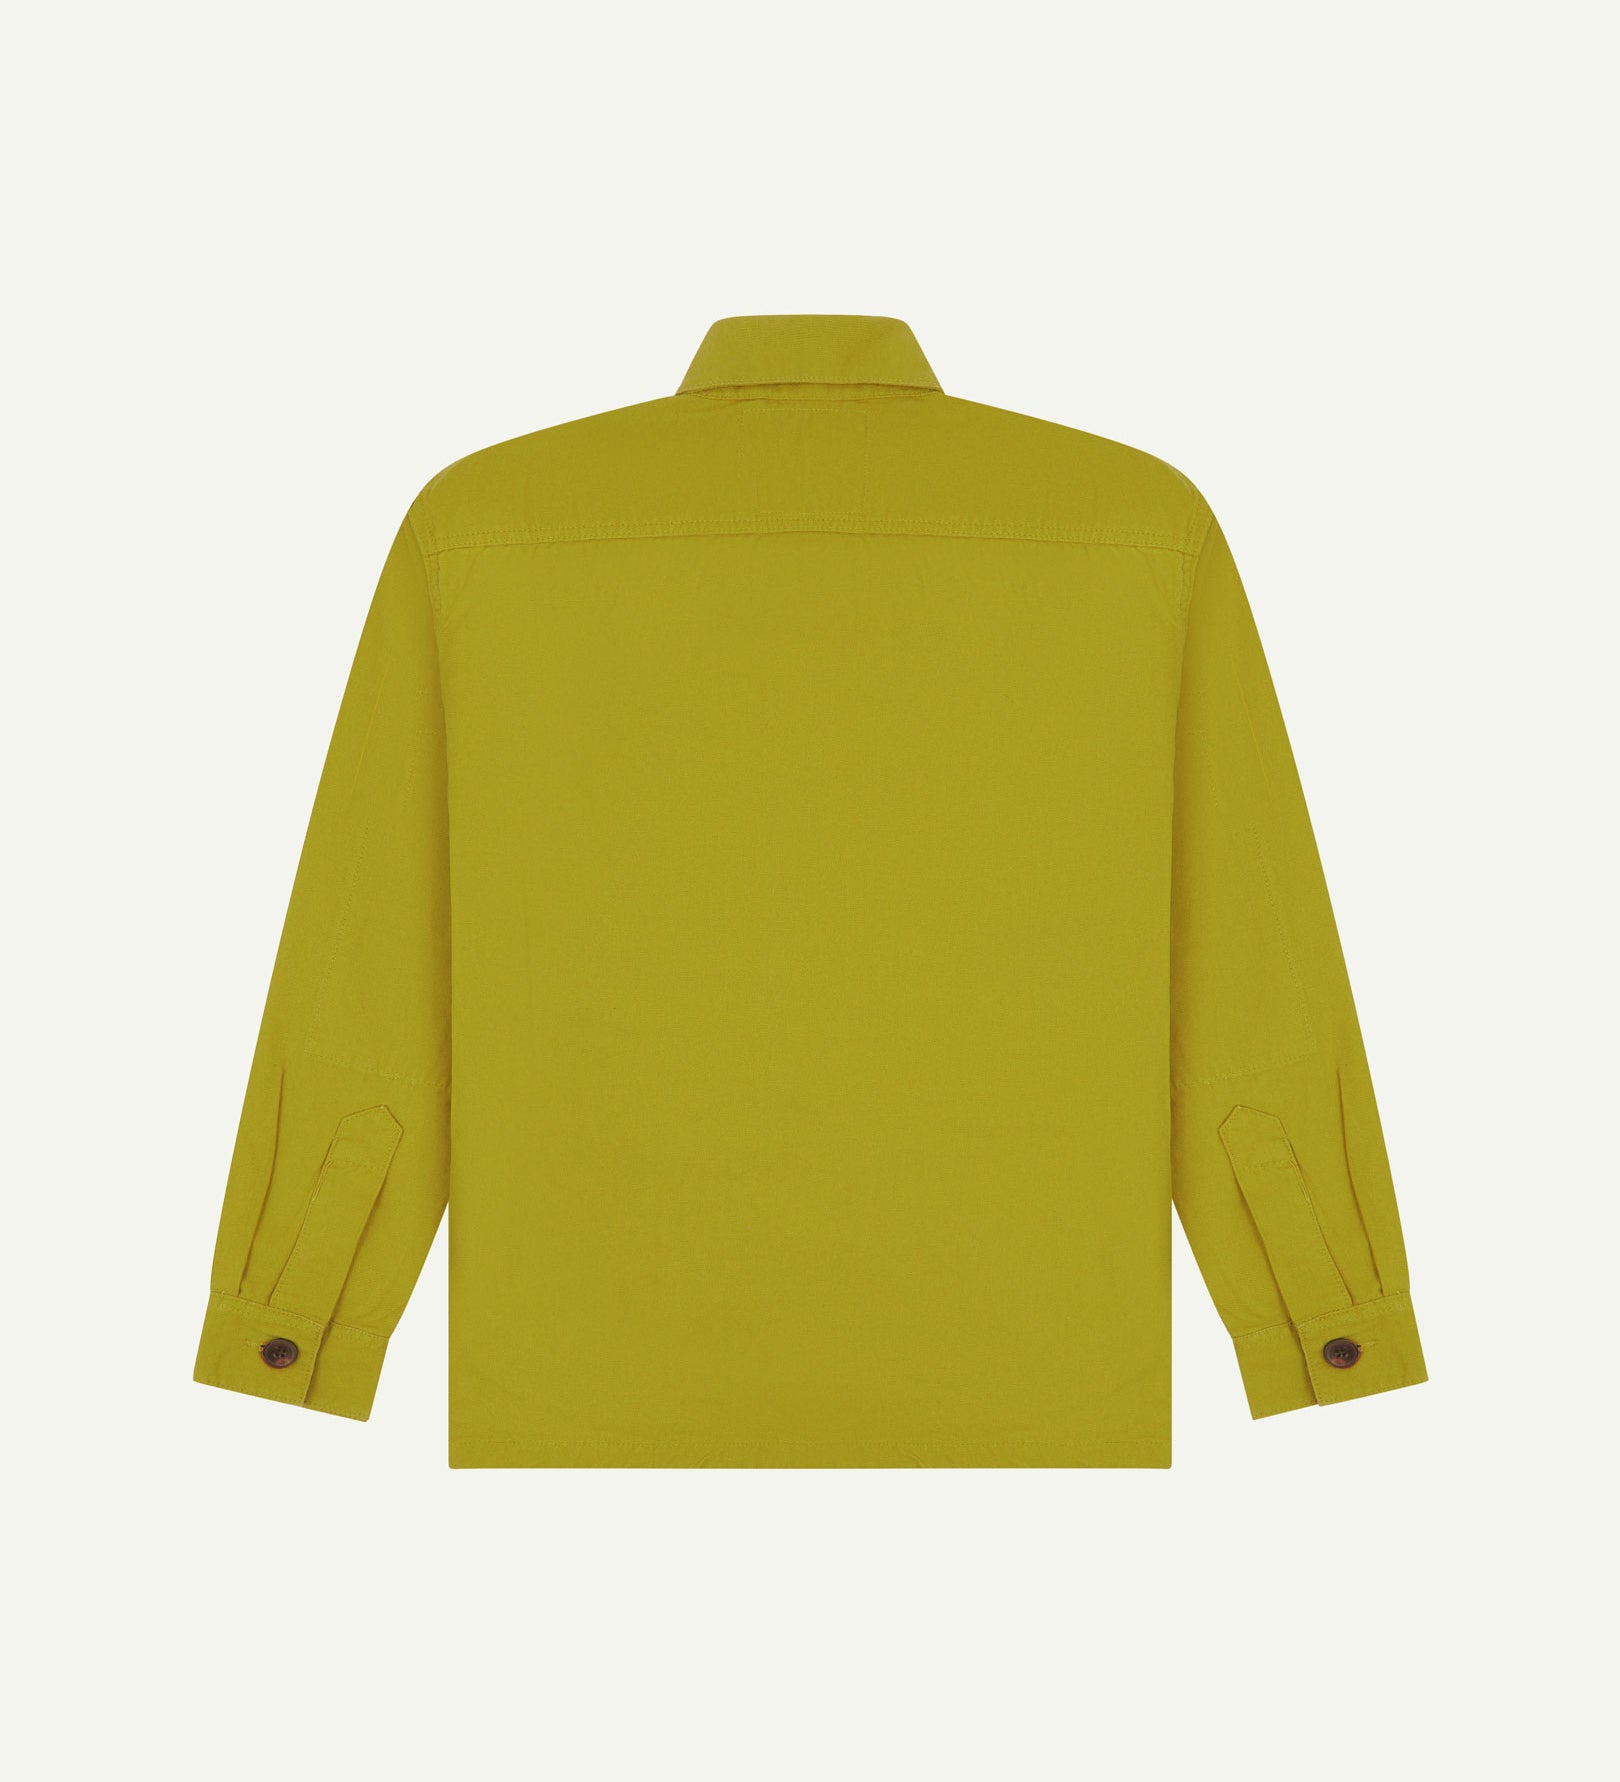 Reverse of yellow-green (pear) buttoned organic cotton workshirt from Uskees showing reinforced elbows, tailored cuffs and boxy silhouette.